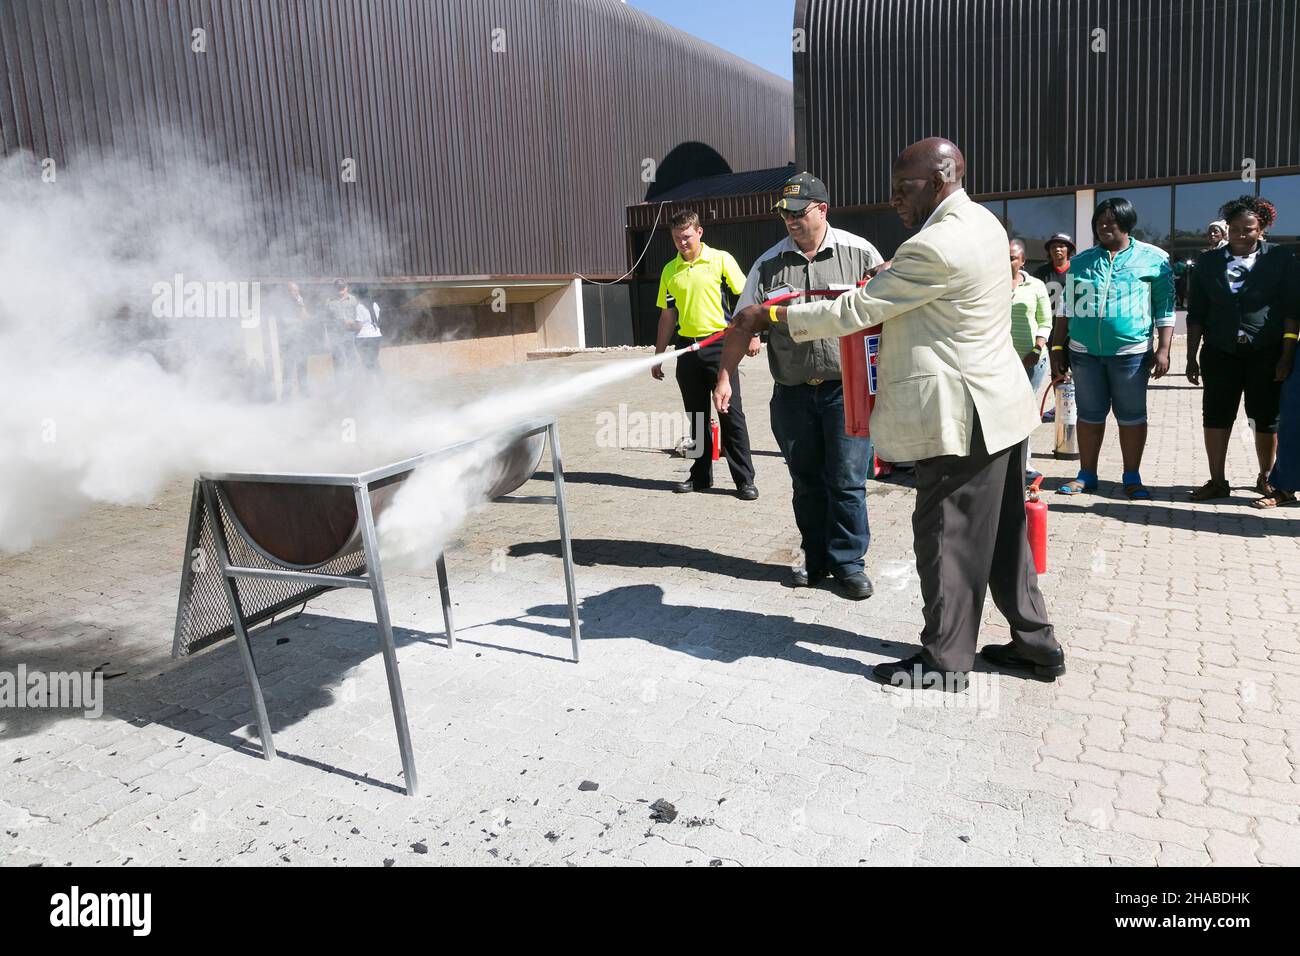 JOHANNESBURG, SOUTH AFRICA - Aug 12, 2021: A shot of practicing fire hazard with a powder-based extinguisher. Stock Photo